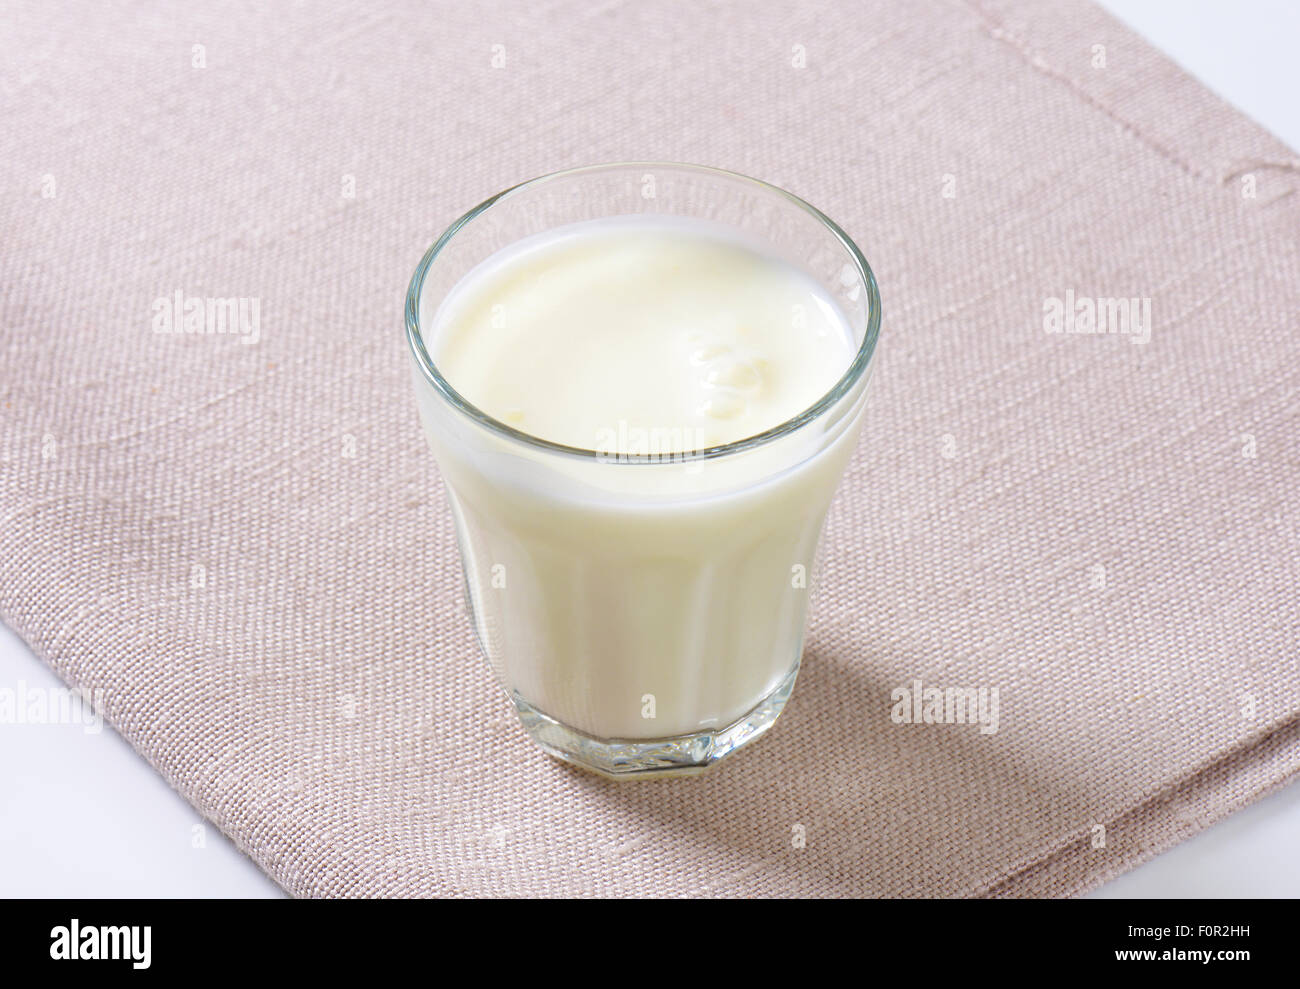 glass of fermented milk drink Stock Photo